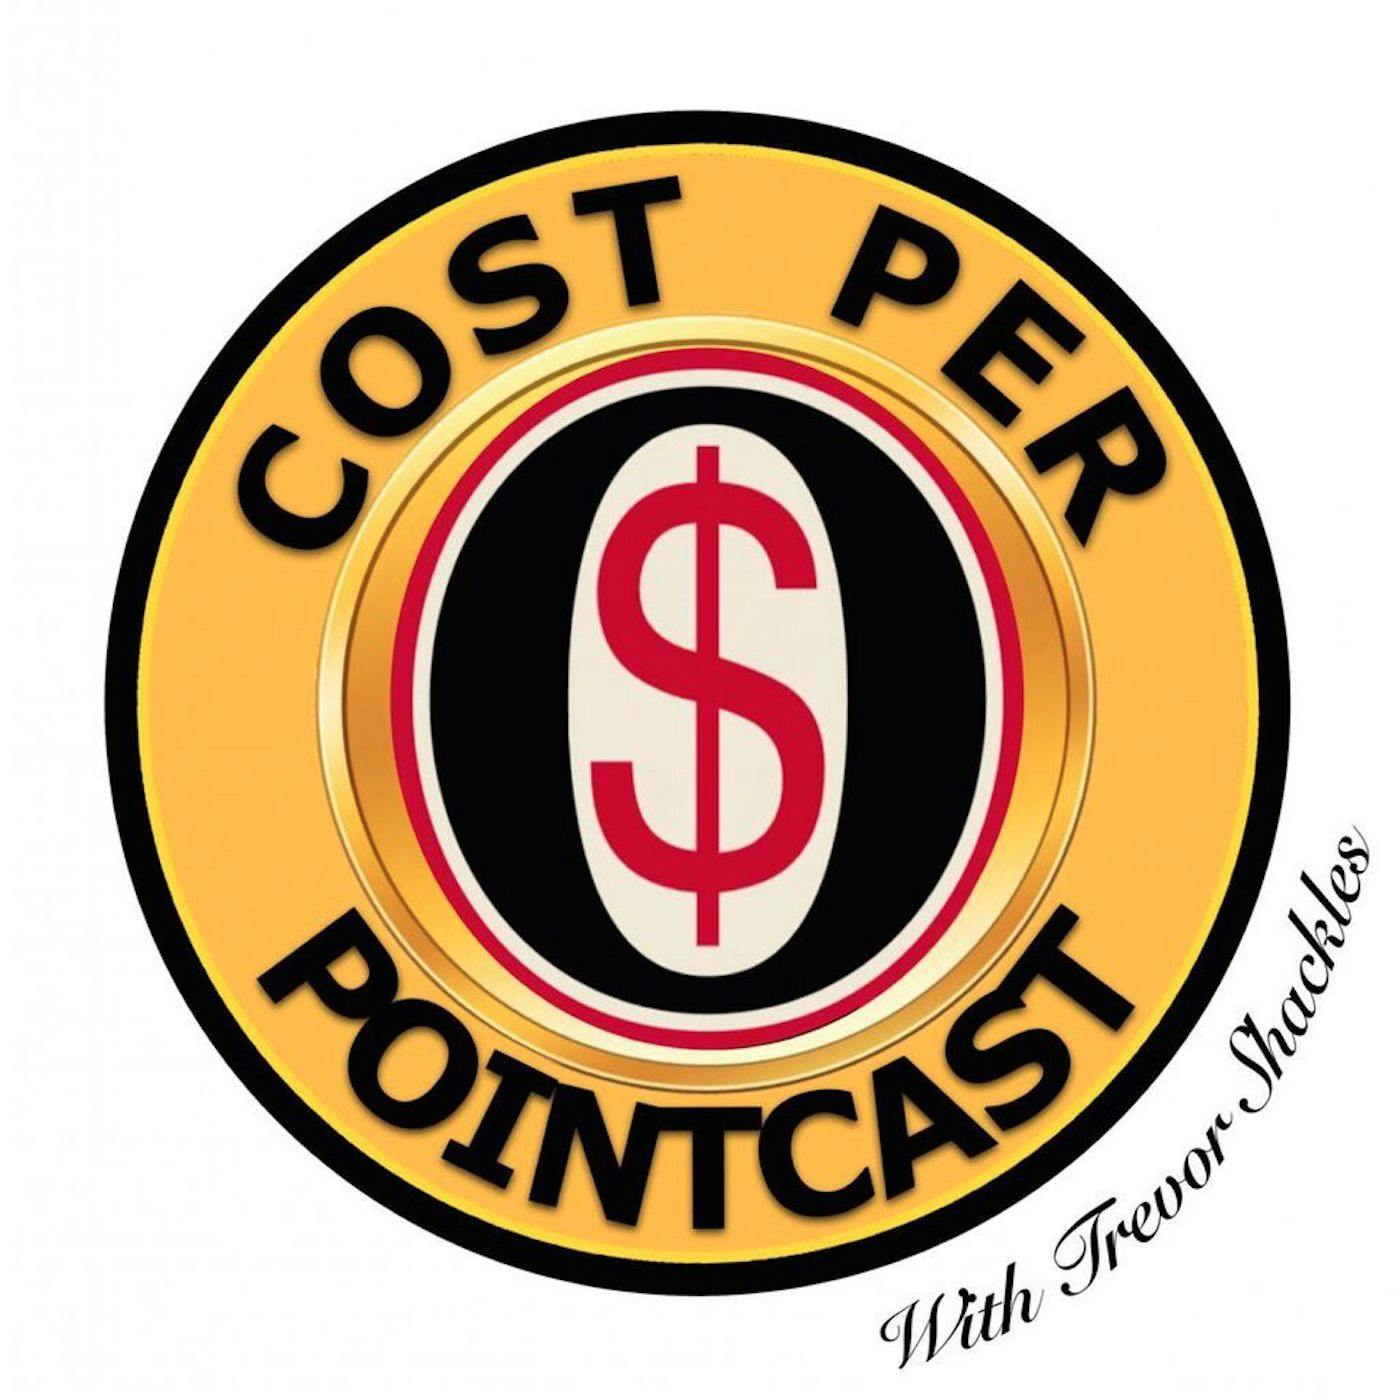 Cost Per Pointcast, Ep. 32: Previewing Belleville's 2nd Season ft. Spencer Blake